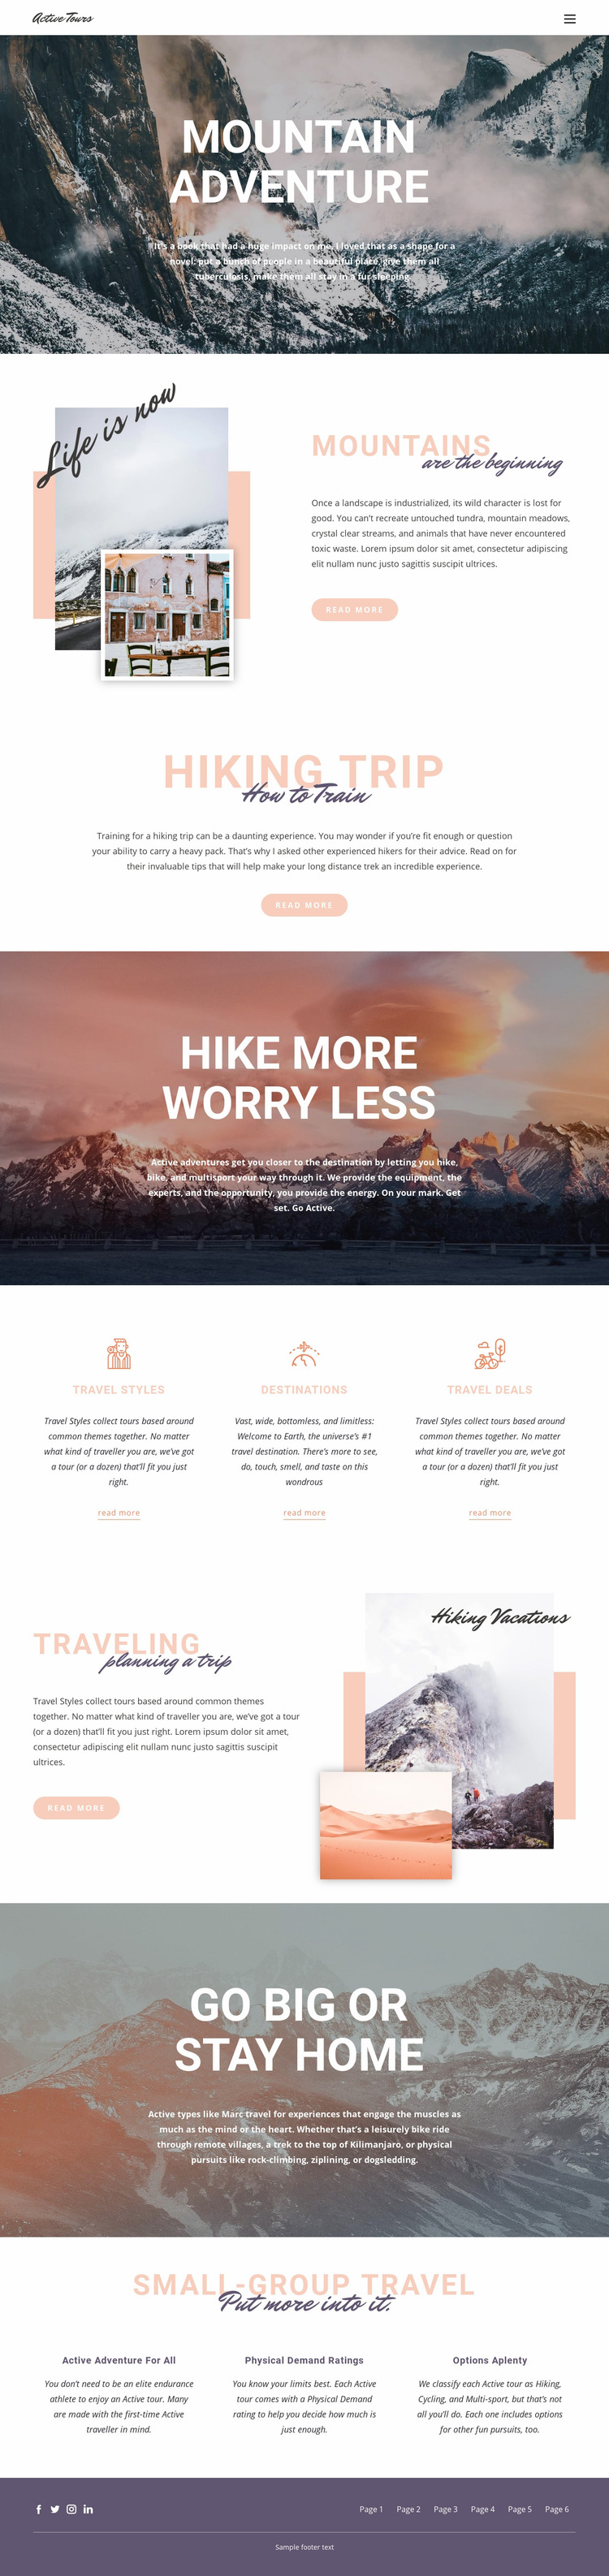 Guided backpacking trips Web Page Design